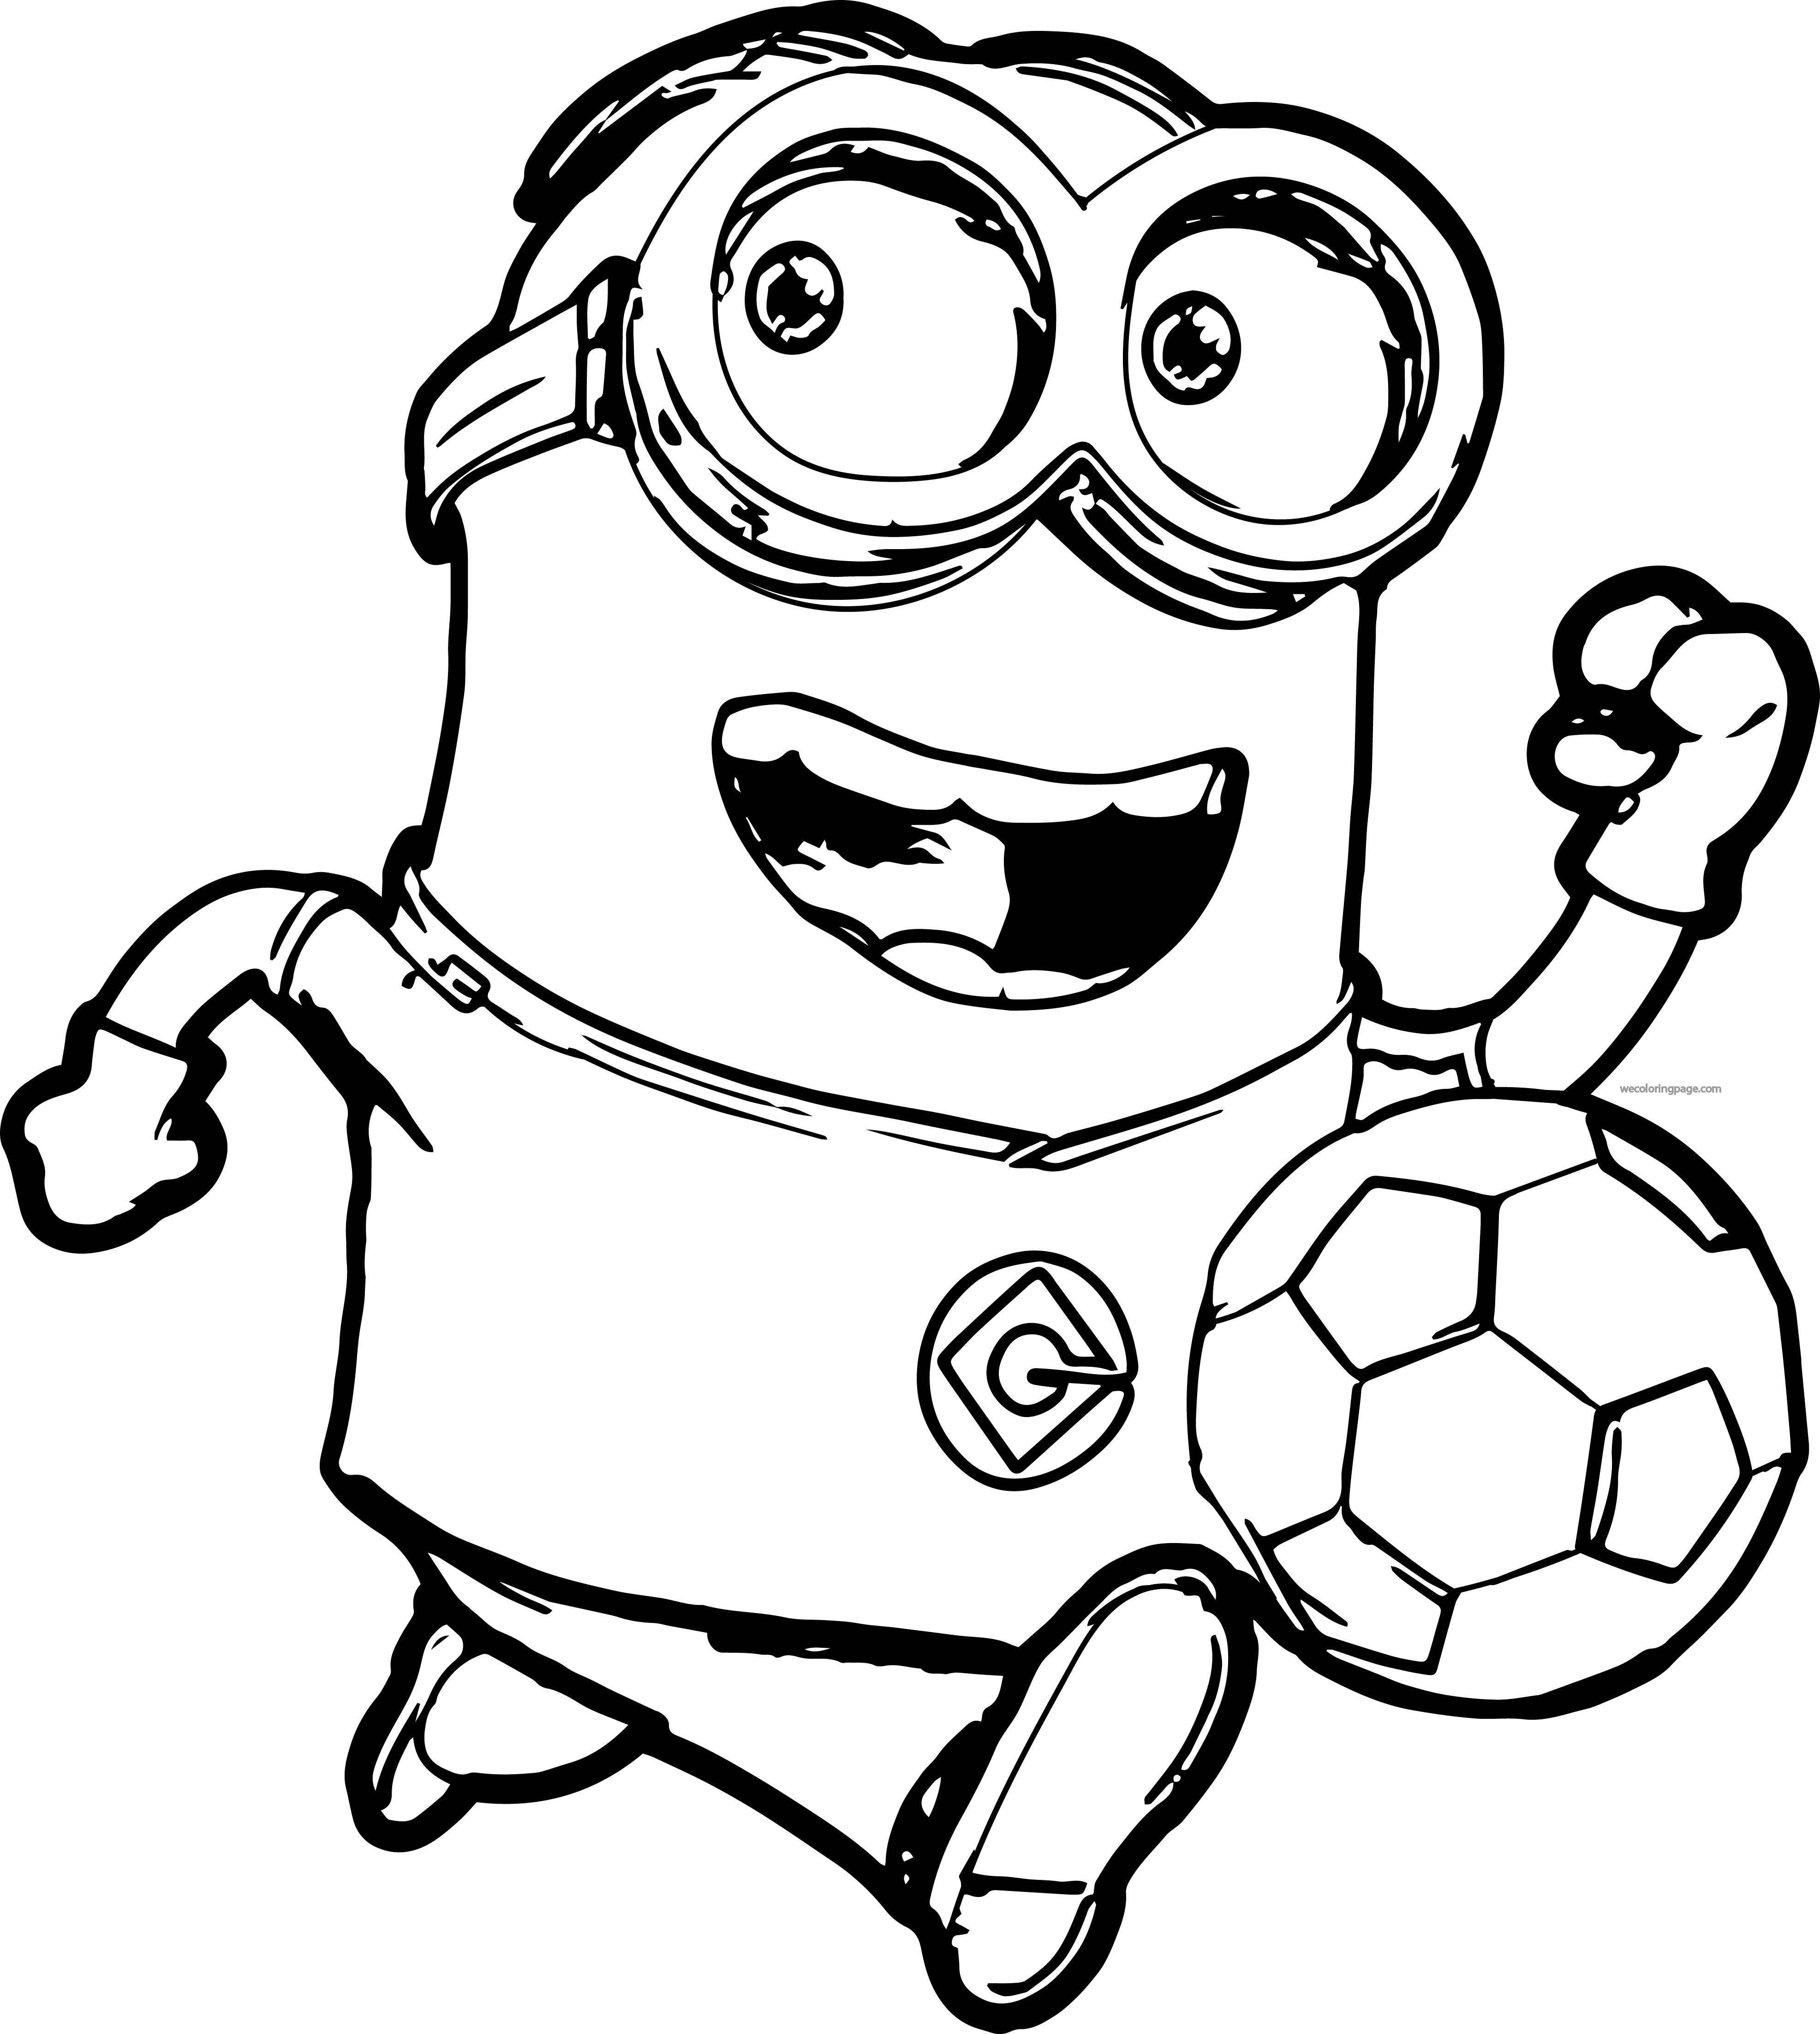 Printable Coloring Pages For Boys Soccer
 Minion Soccer Player Coloring Pages